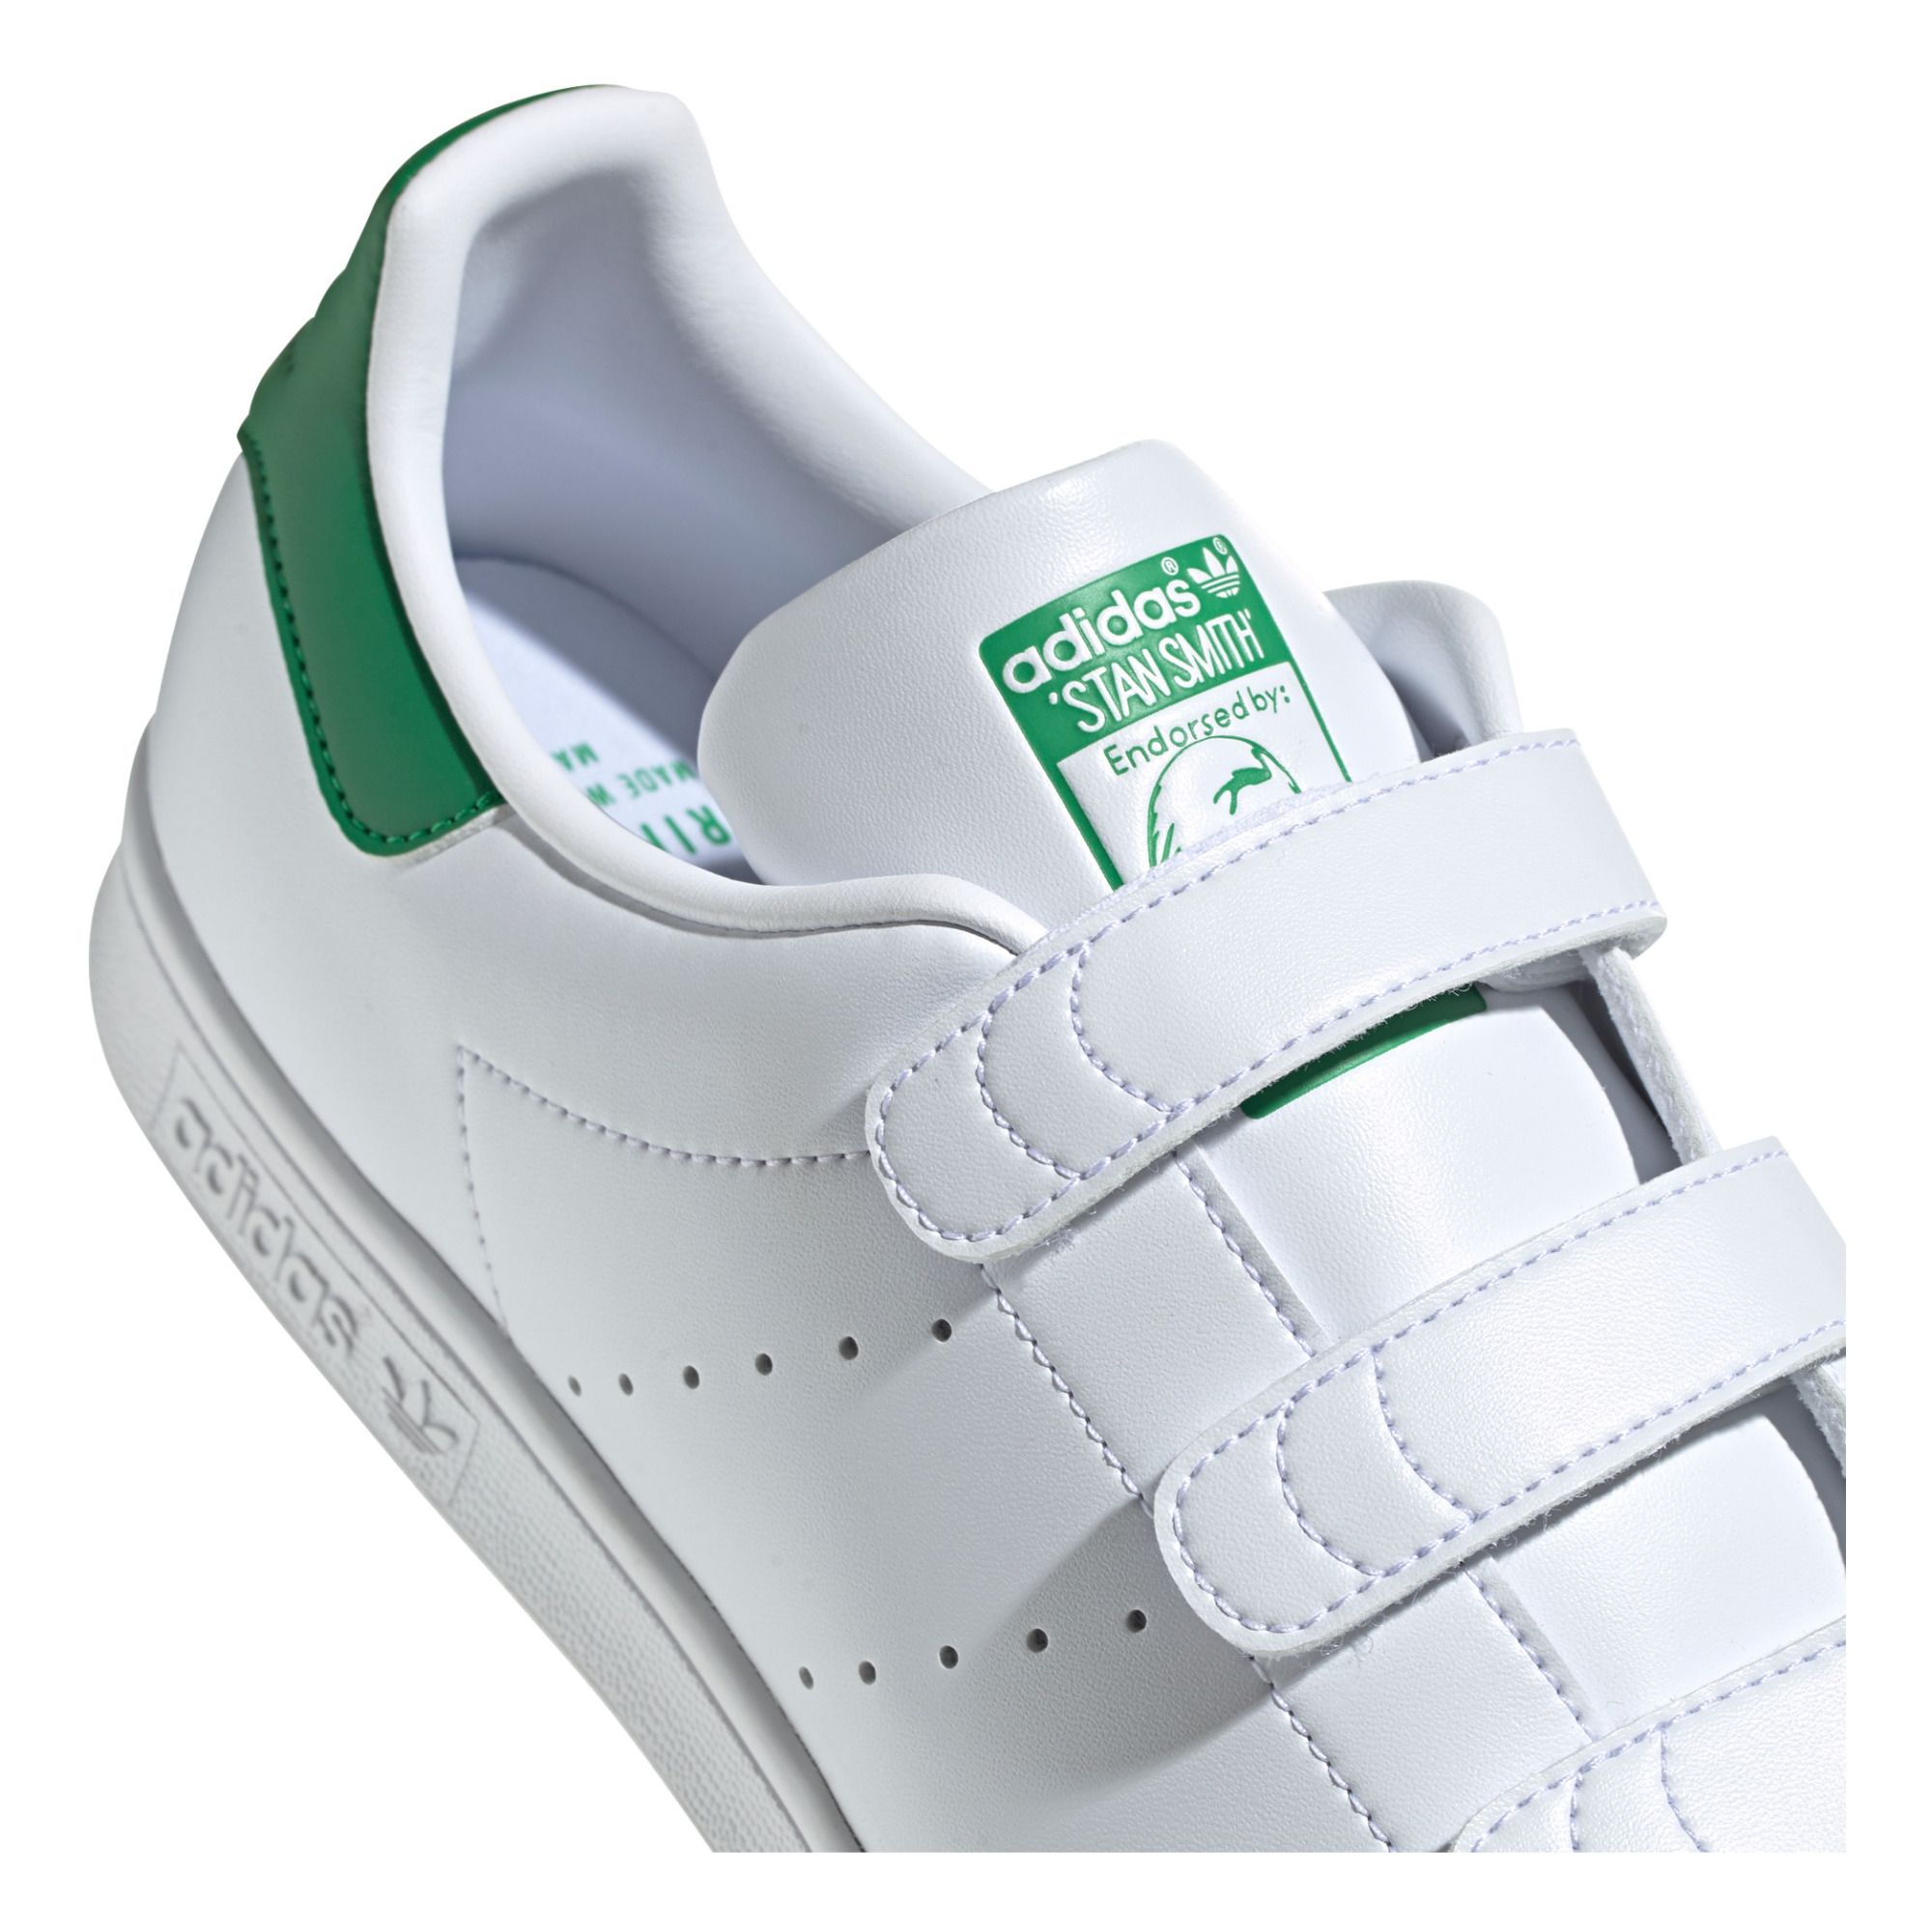 Print ungdomskriminalitet barmhjertighed Adidas - Stan Smith Velcro Sneakers - Green | Smallable